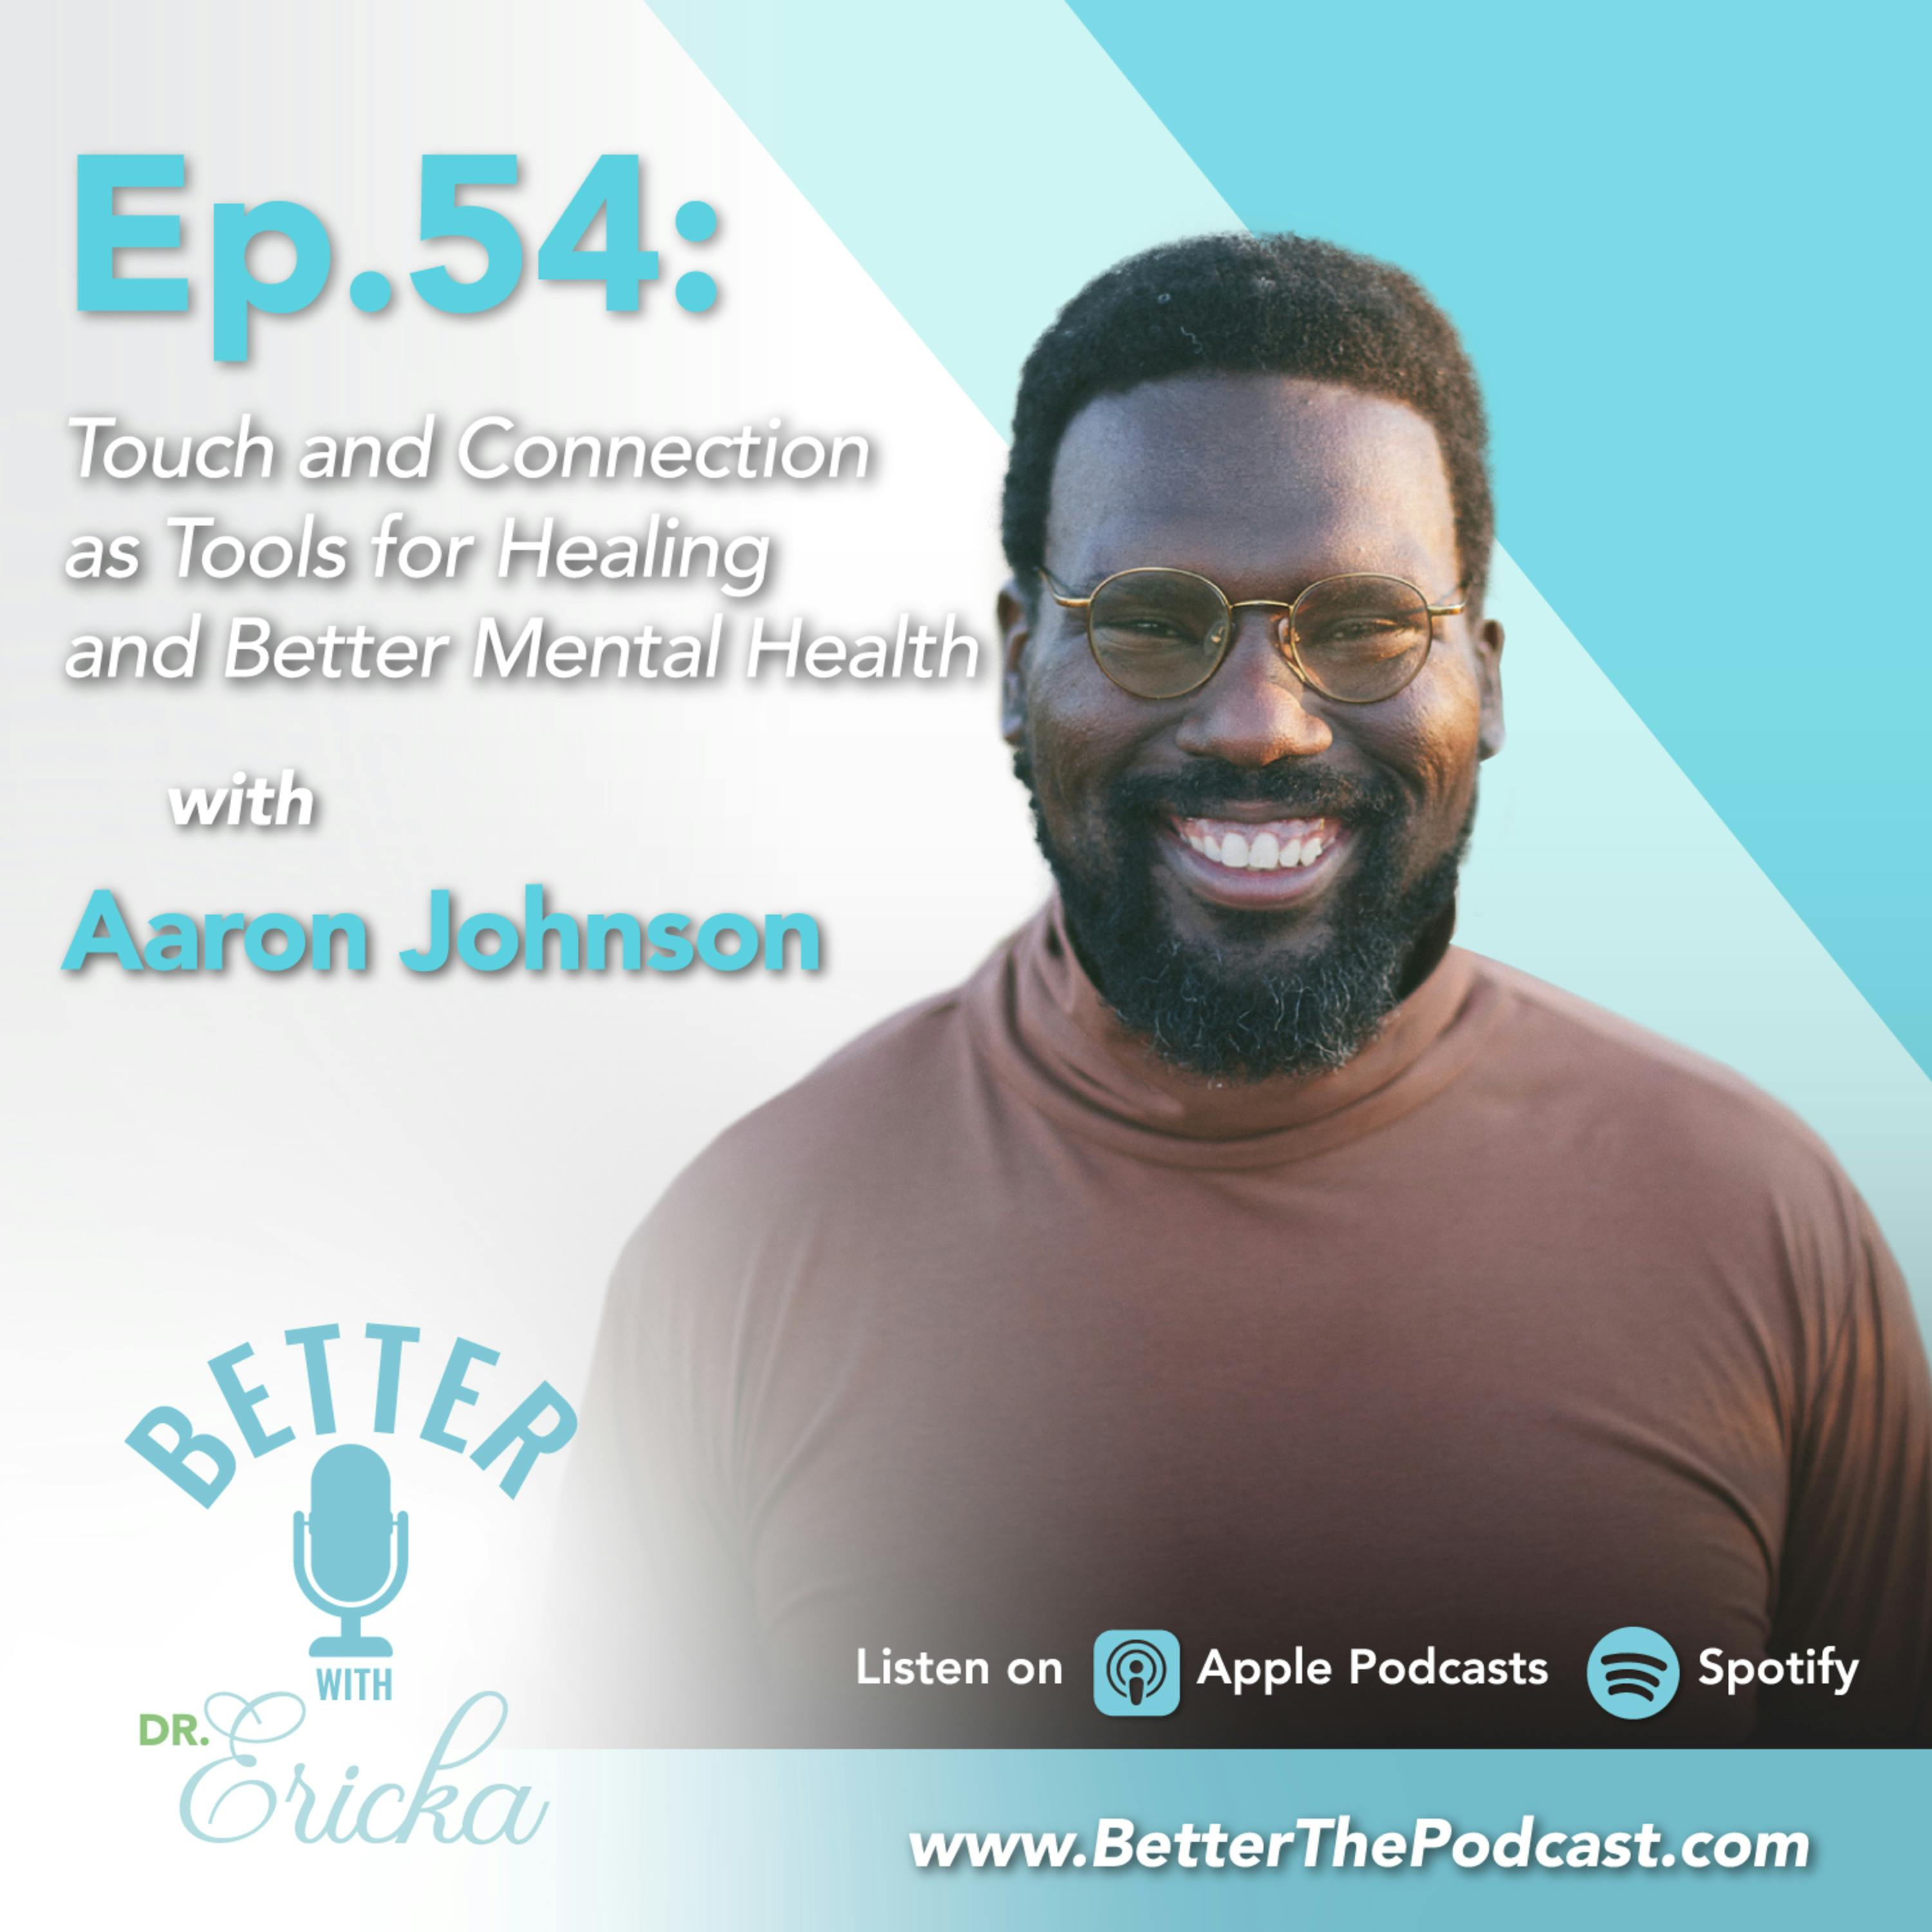 Touch and Connection as Tools for Healing and Better Mental Health with Aaron Johnson episode